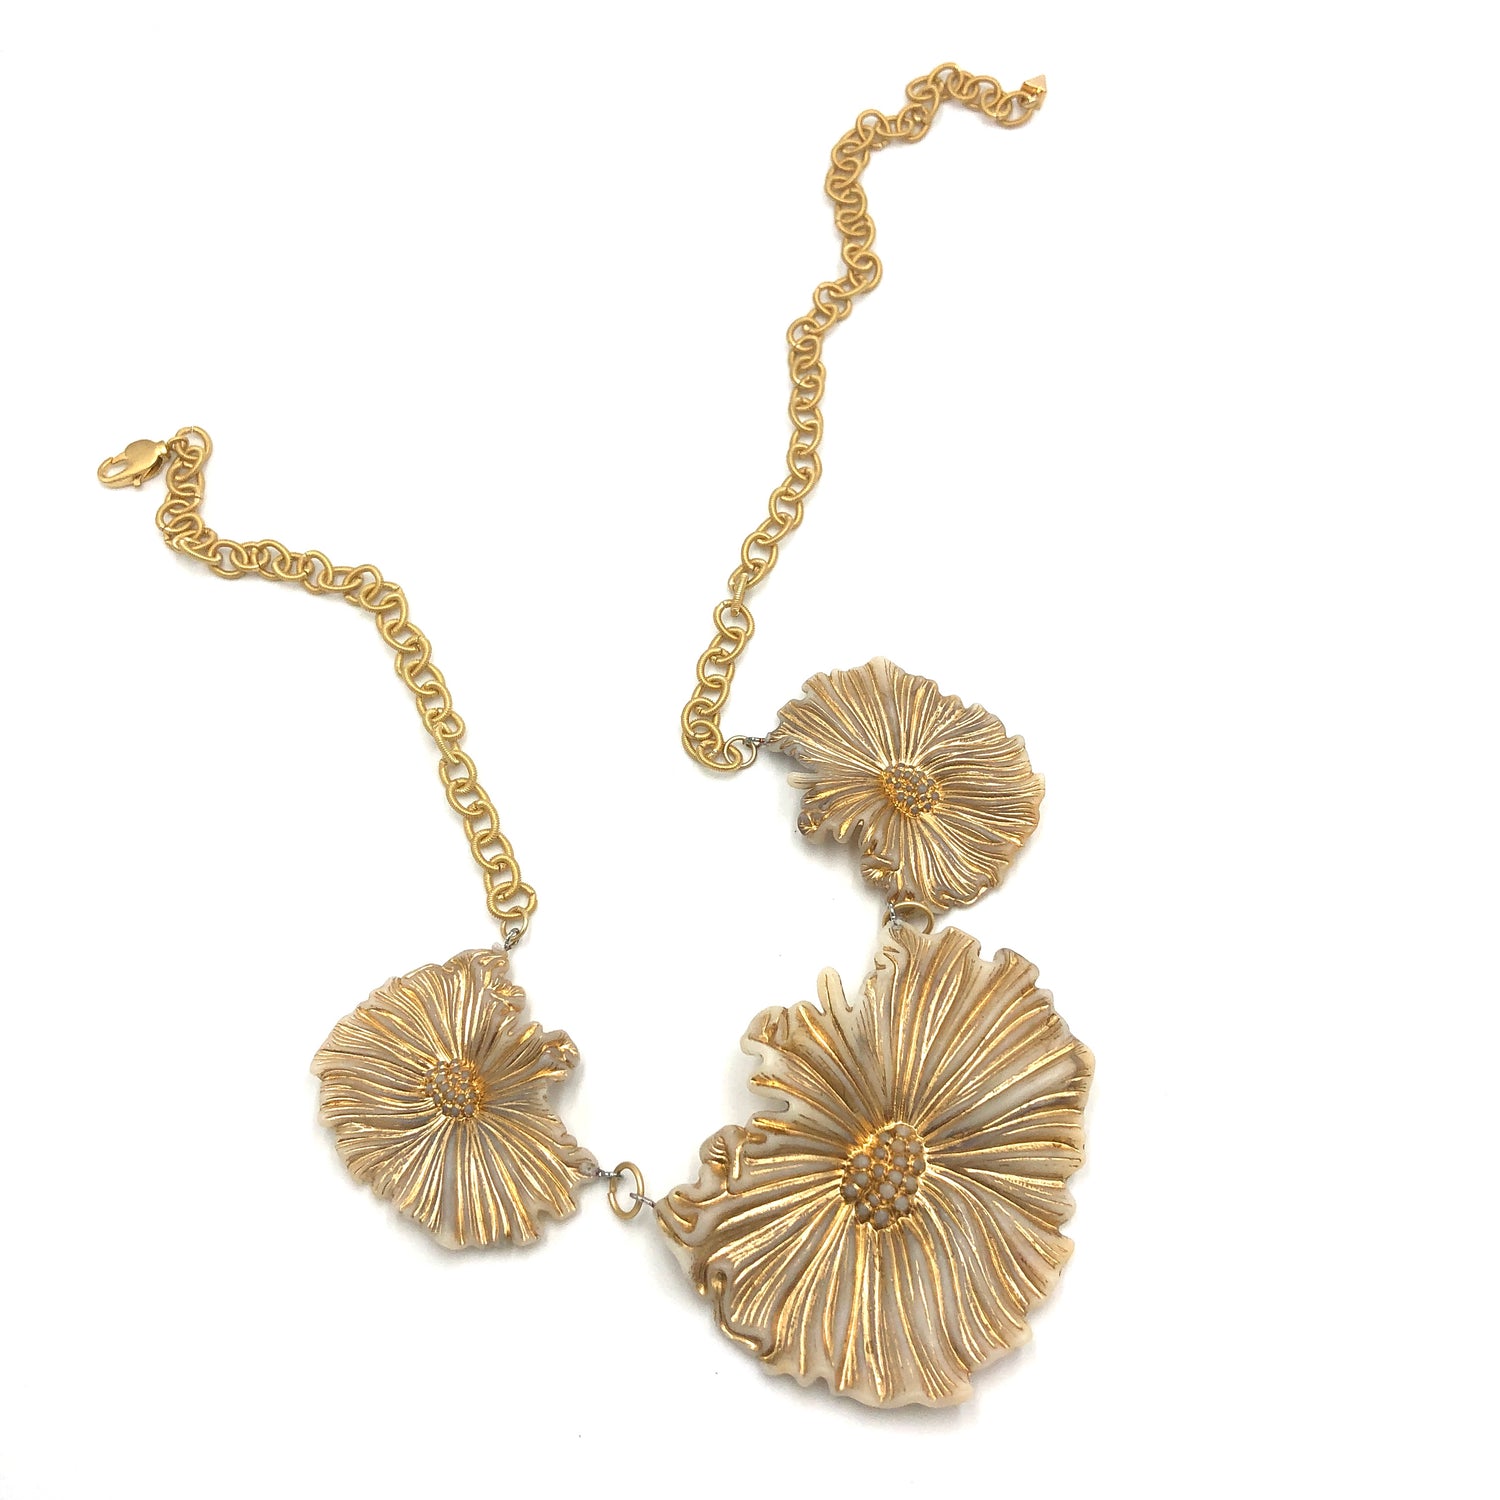 Cosmos Gilded Cream Triple Flower Necklace